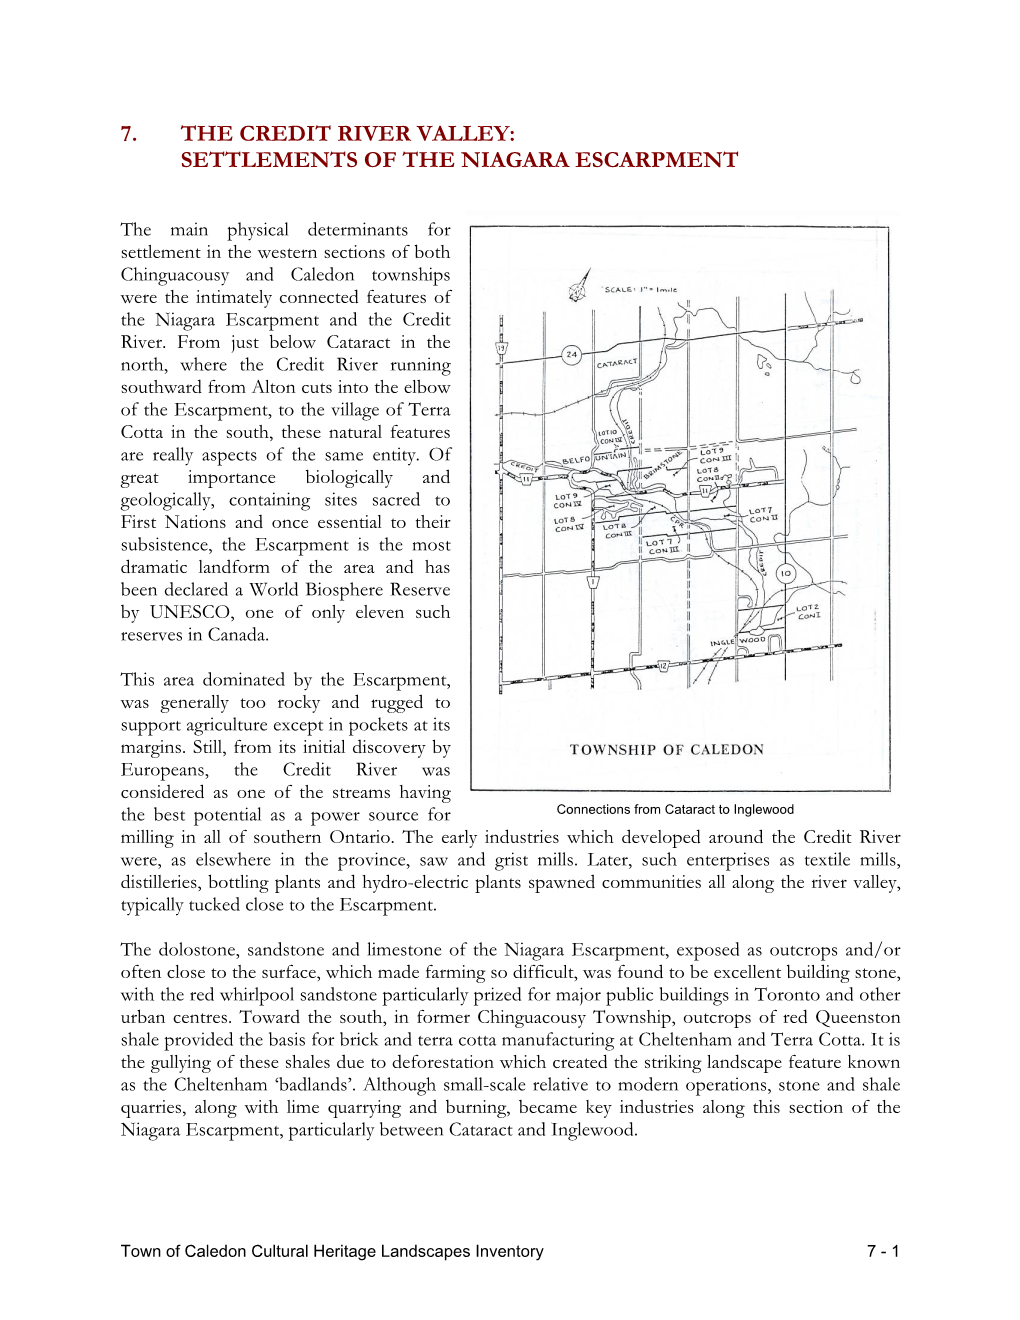 Section 7: the Credit River Valley: Settlements of the Niagara Escarpment